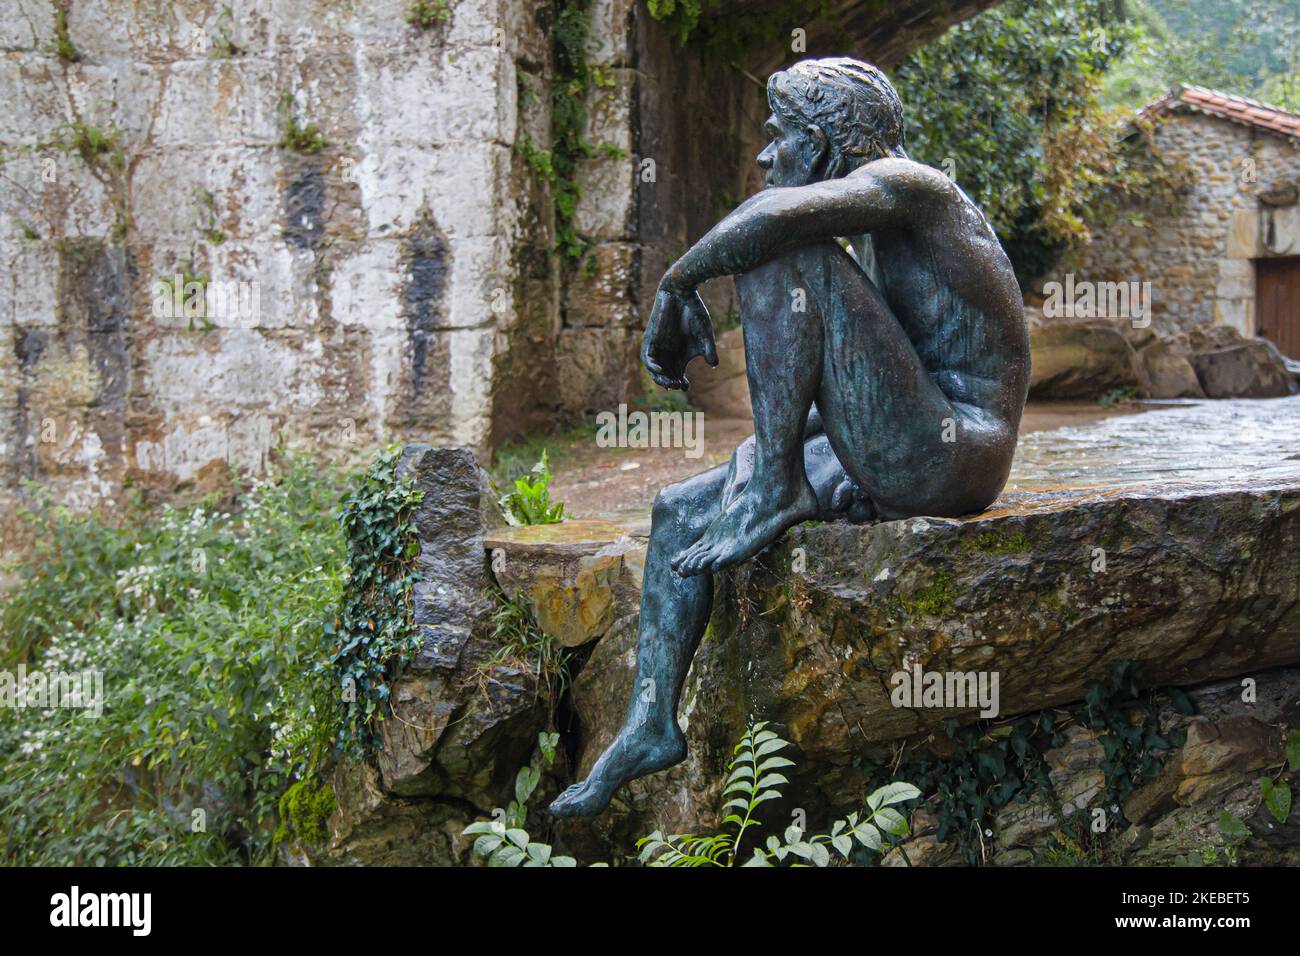 Sculpture in tribute to the Fish-man in Lierganes, Cantabria, Spain. Stock Photo